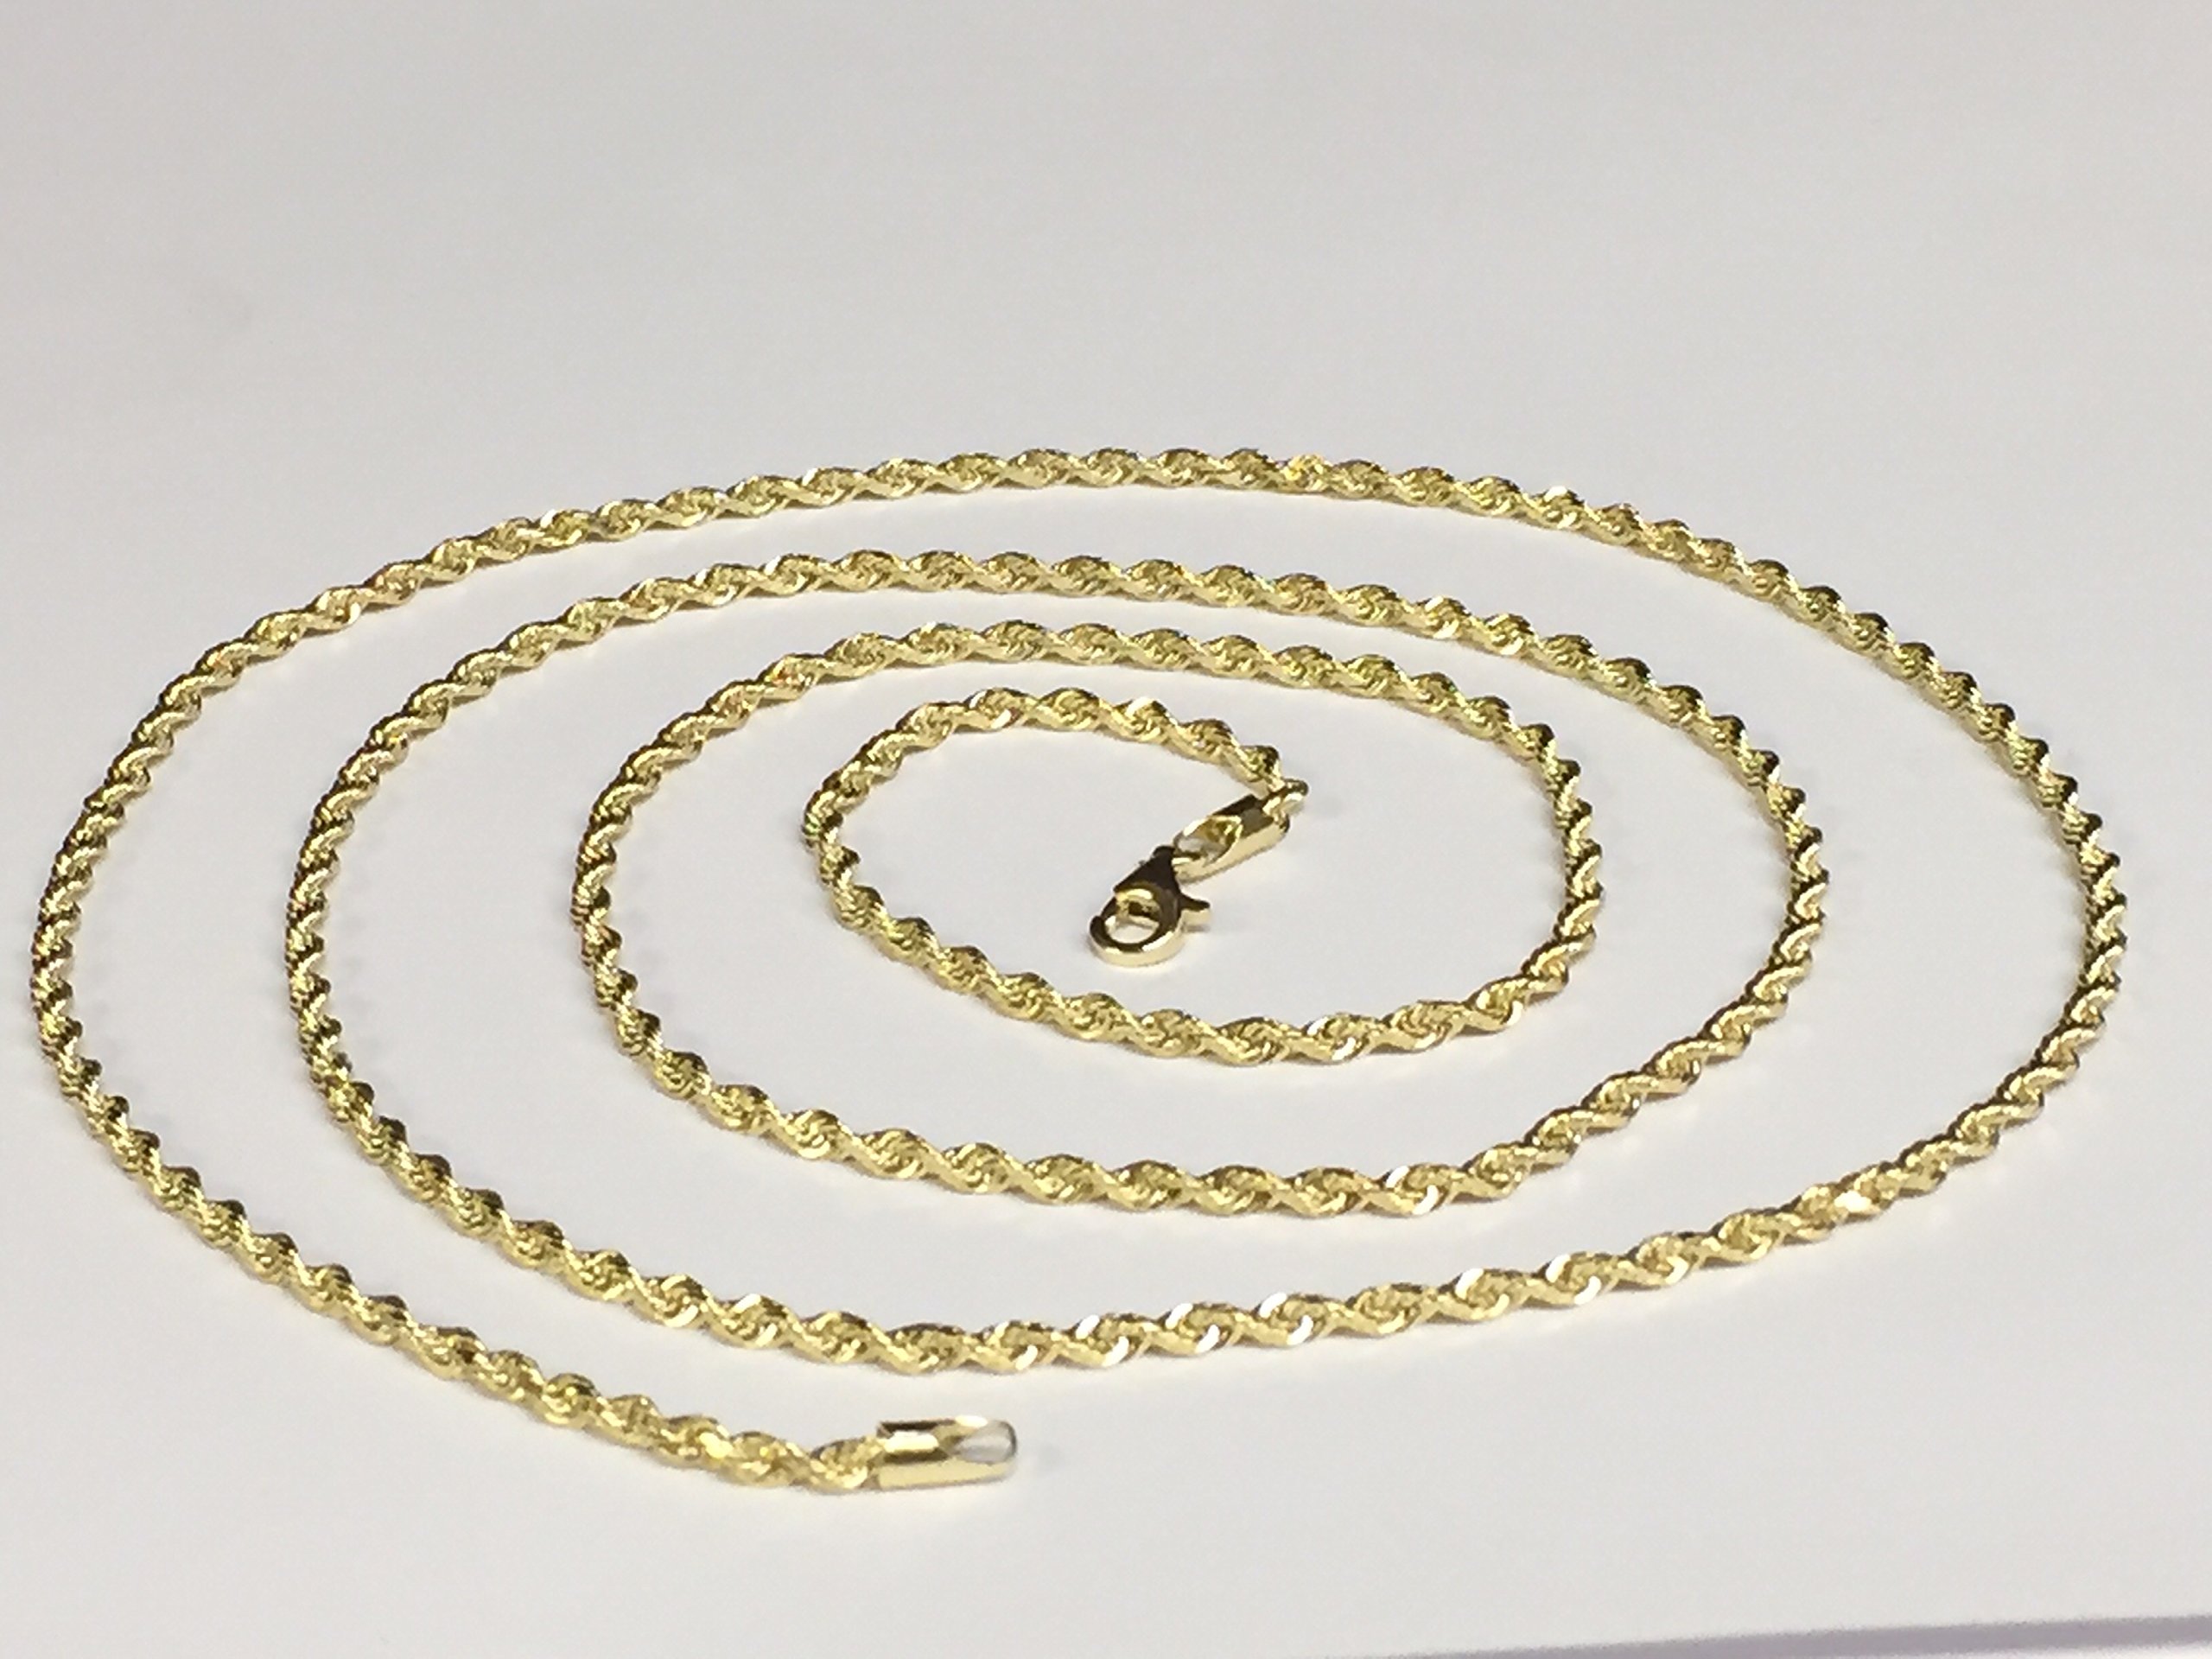 14K Solid Yellow Gold Diamond Cut Rope Pendant Link Chain/Necklace 2.5 Mm (24 Inches)